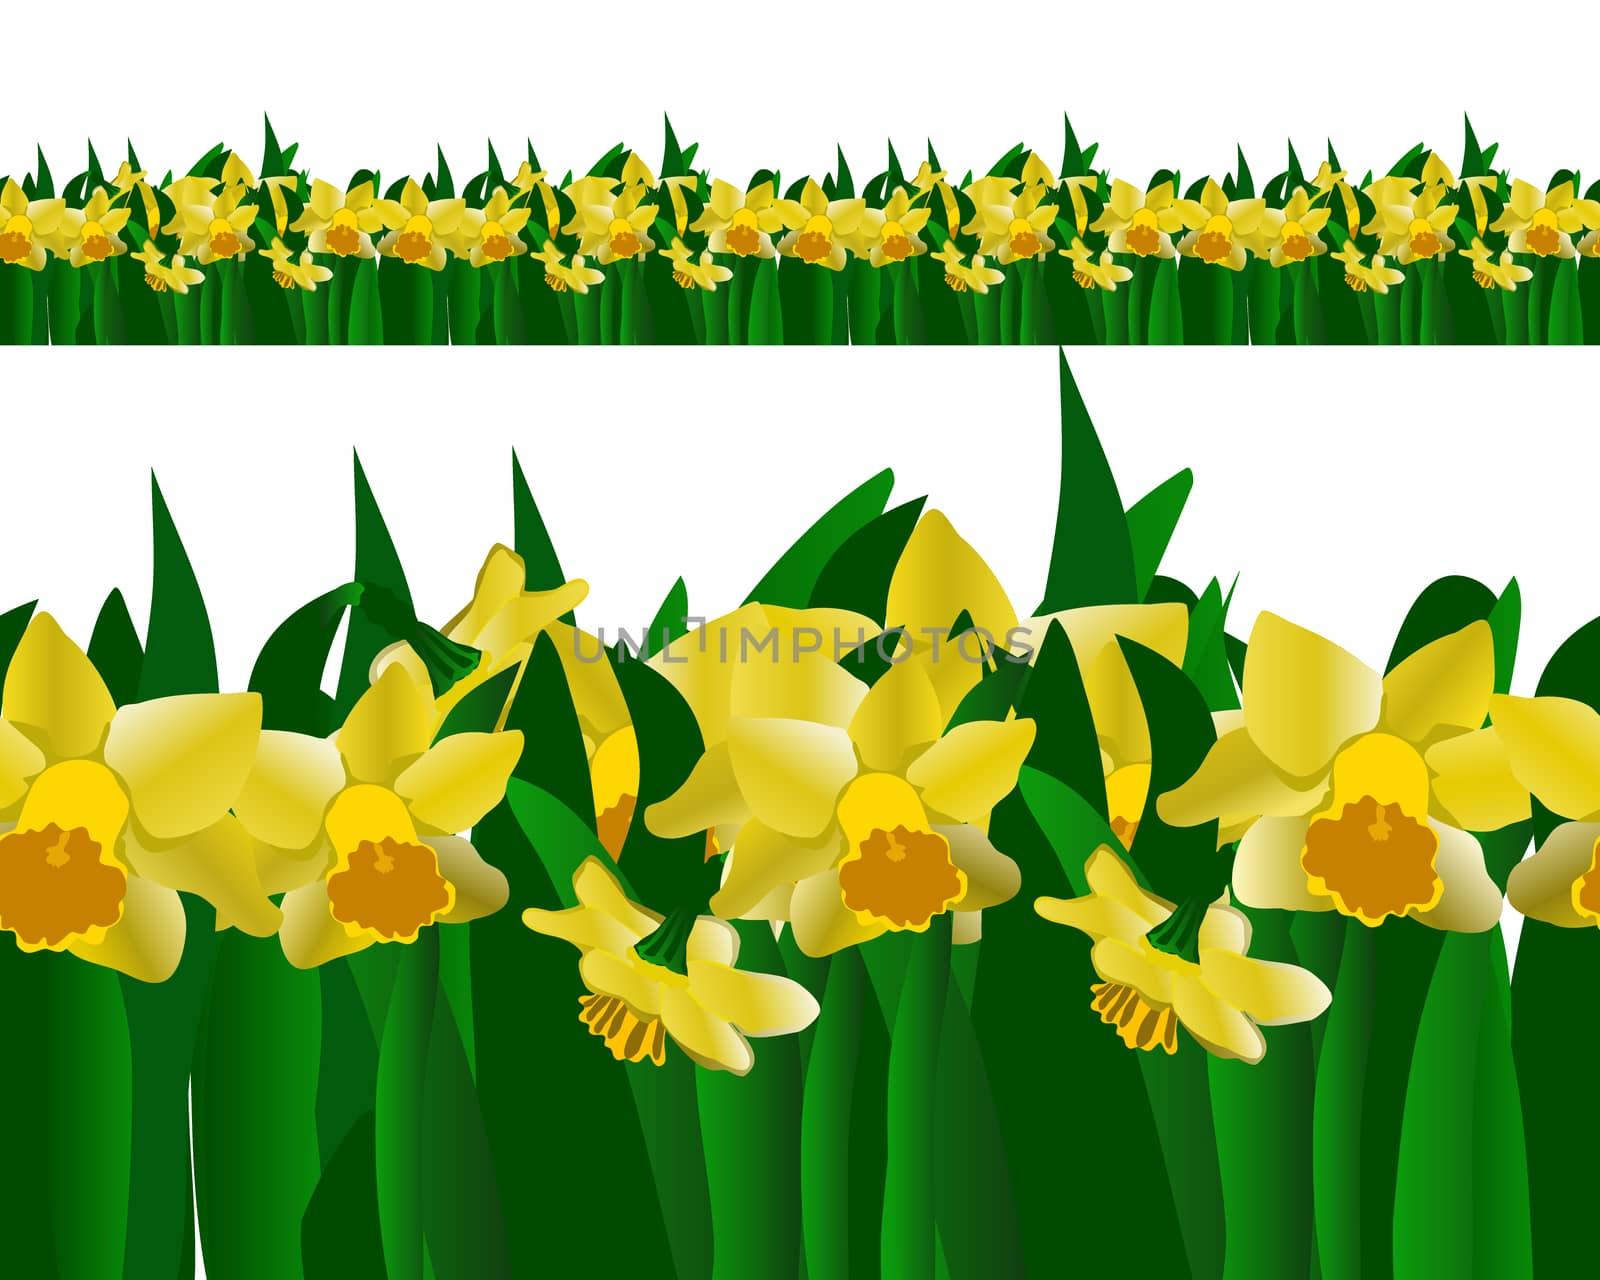 Daffodils endless horizontal banner. Spring repeat border isolated on white background. Vector illustration.